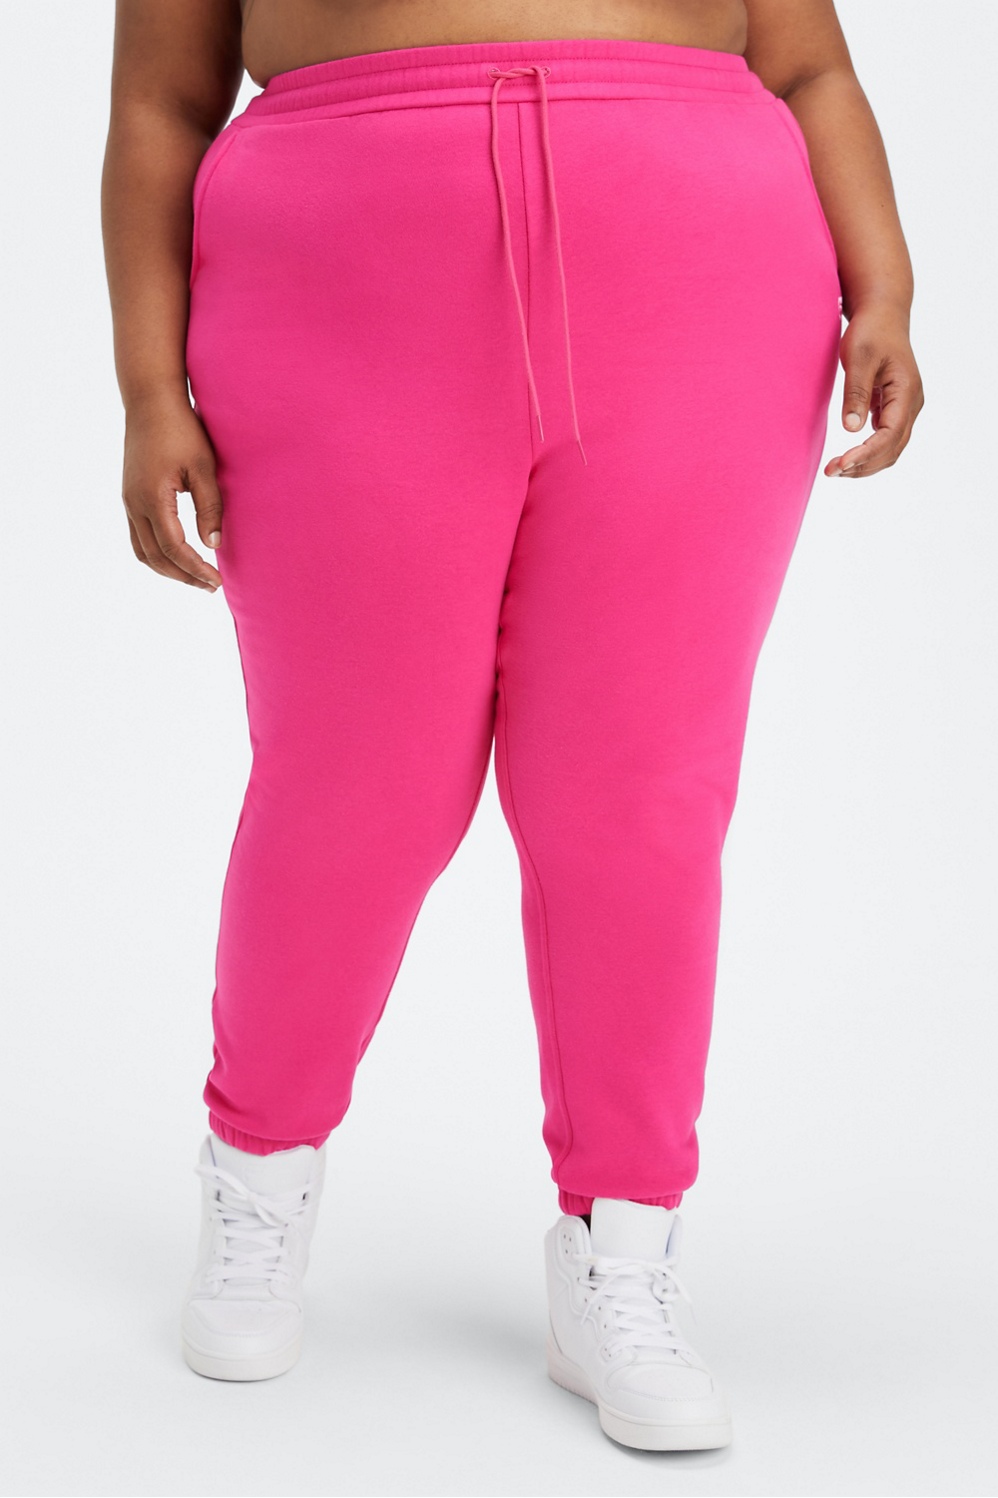 wild fable, Pants & Jumpsuits, Hot Pink Velour Joggers Sweatpants Size  Medium With Pockets